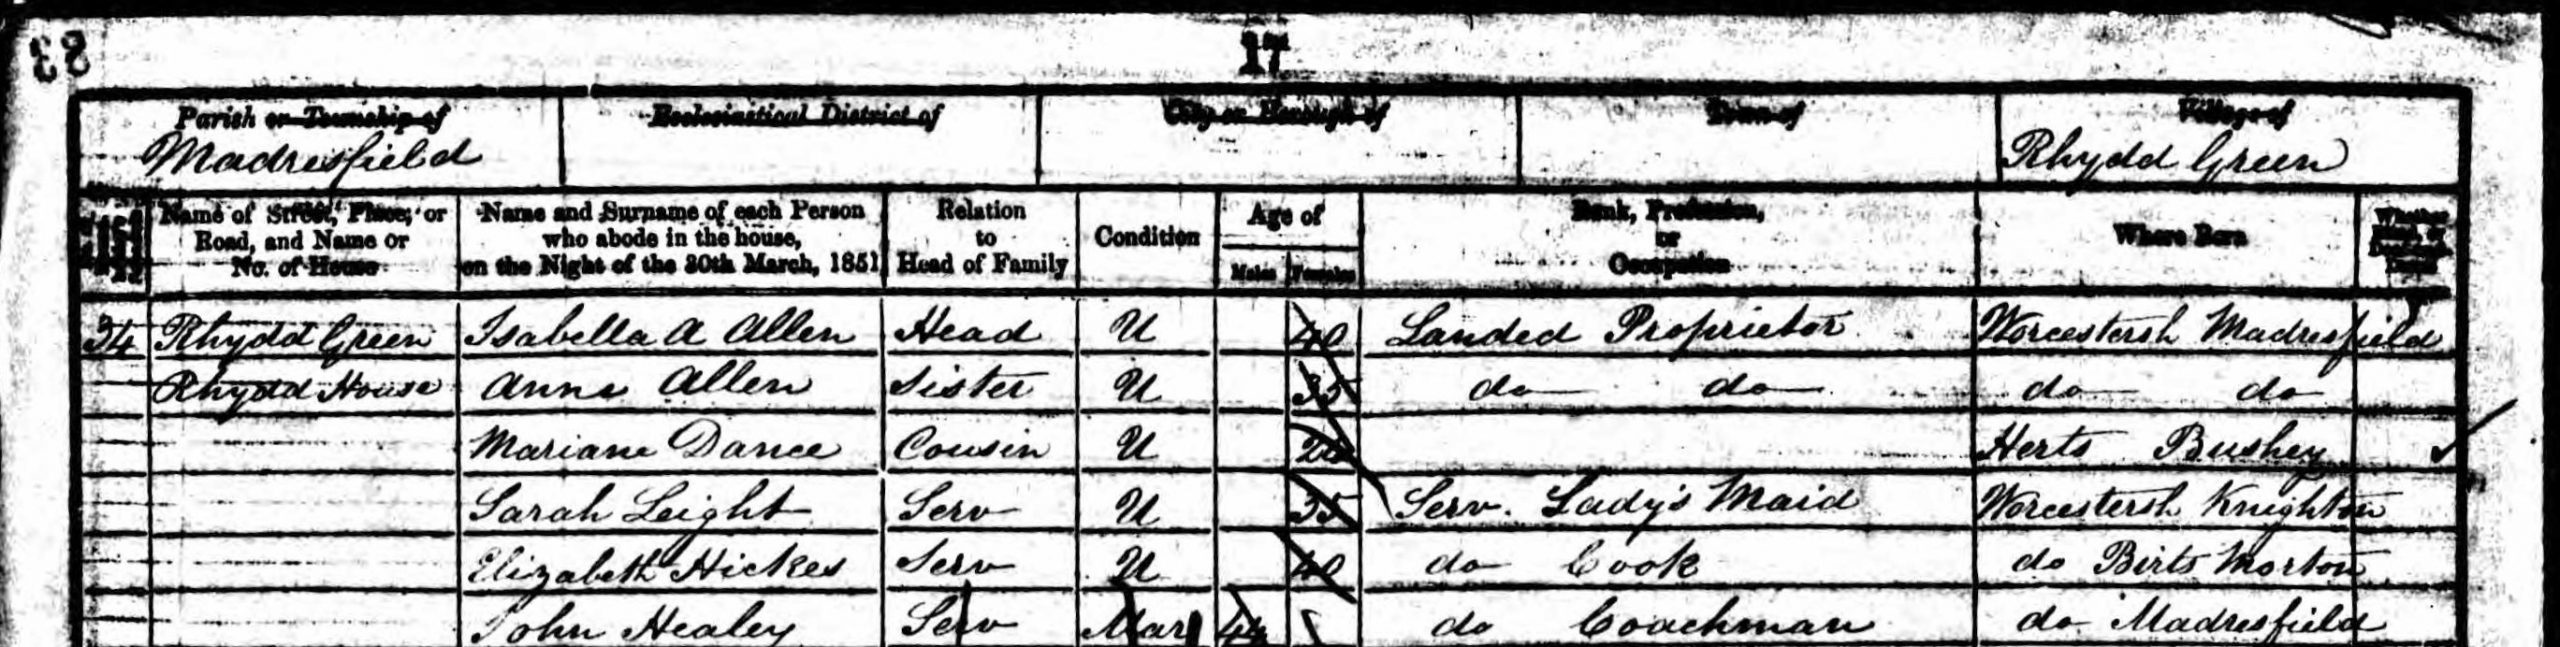 1851 Census showing the Allen family at Rhydd House